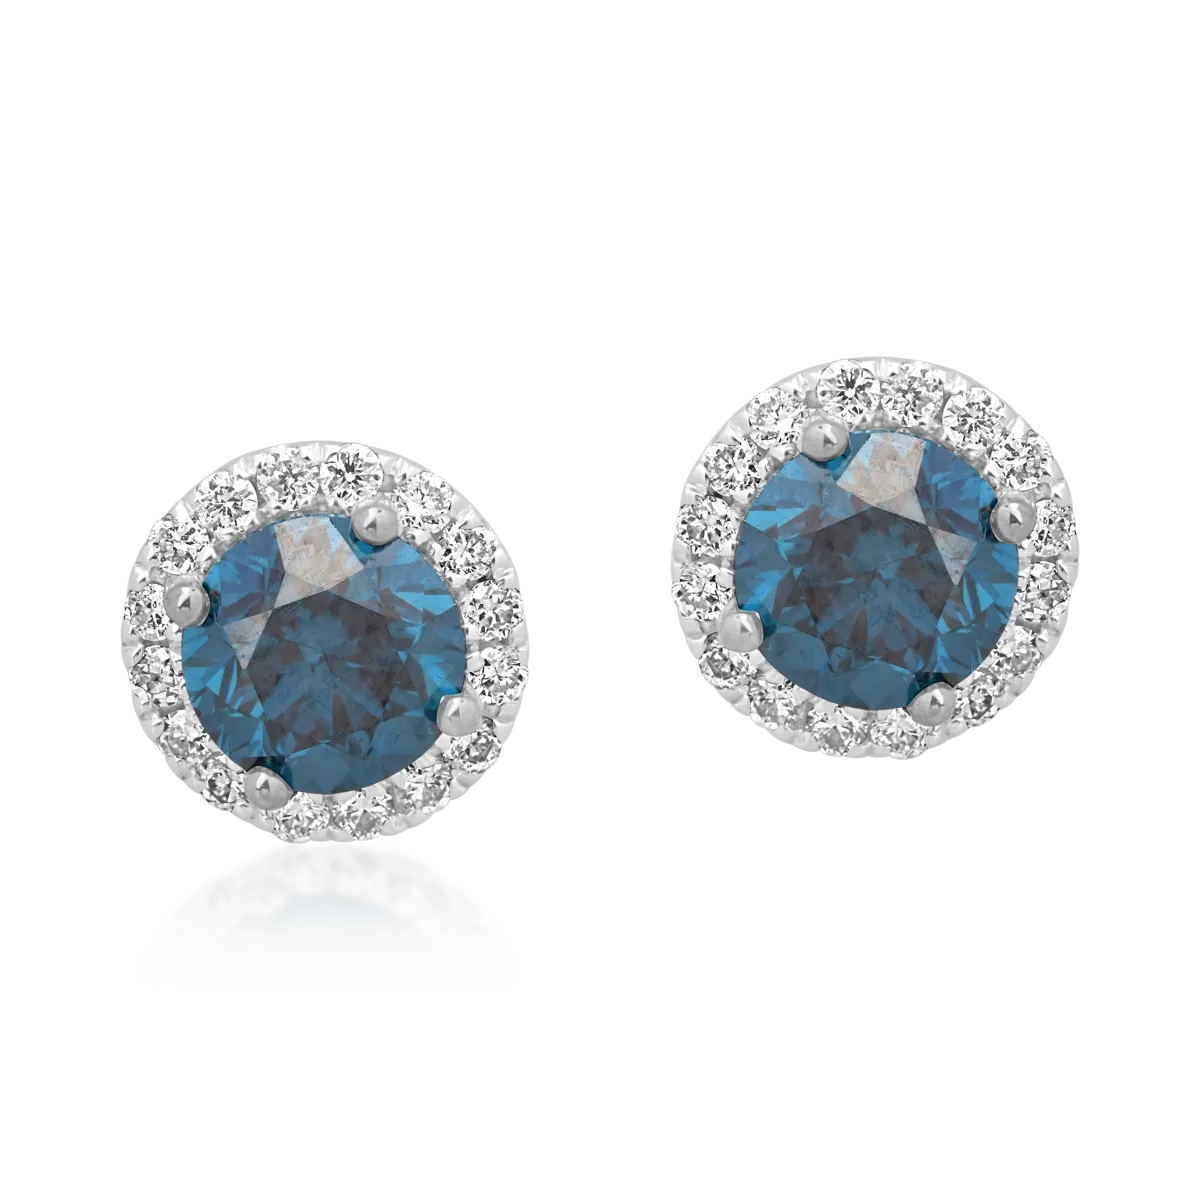 18K white gold earrings with 0.39ct blue diamonds and 0.09ct diamonds